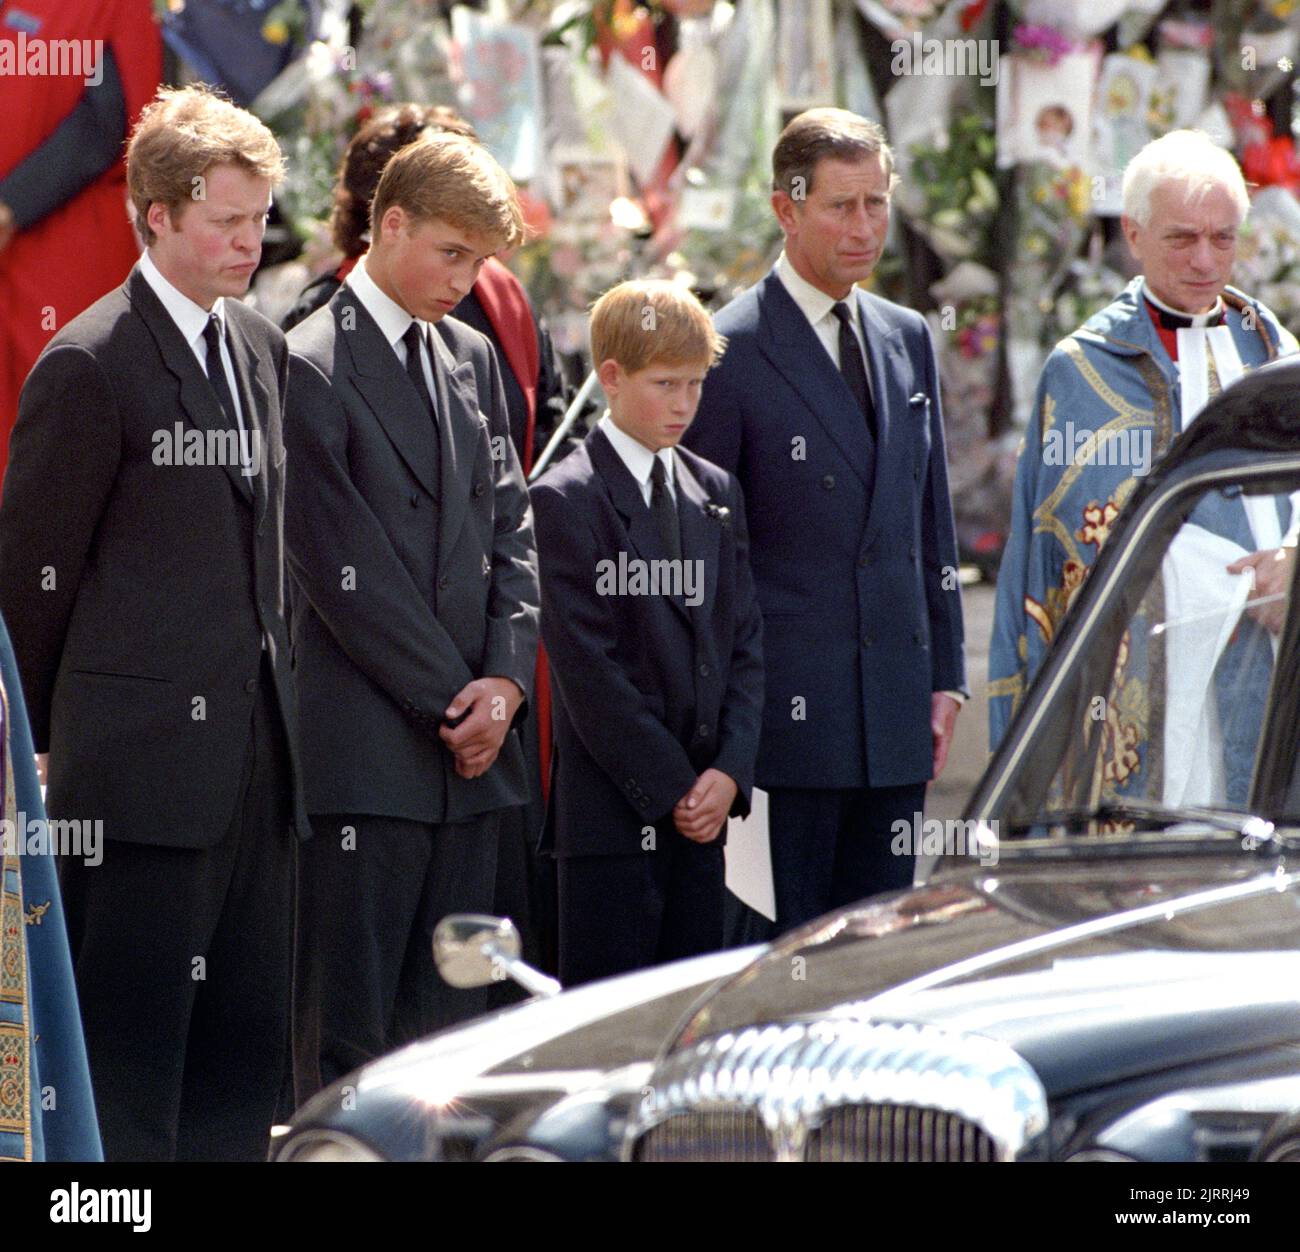 File photo dated 06/09/97 of (left-right) the Earl Spencer, Prince William, , Prince Harry, the Prince of Wales, wait as the hearse carrying the coffin of Diana, Princess of Wales prepares to leave Westminster Abbey in London, following her funeral service. Diana, Princess of Wales, was killed on August 31 1997 in a car crash in the Pont de l'Alma tunnel in Paris. Issue date: Friday August 26, 2022. Stock Photo